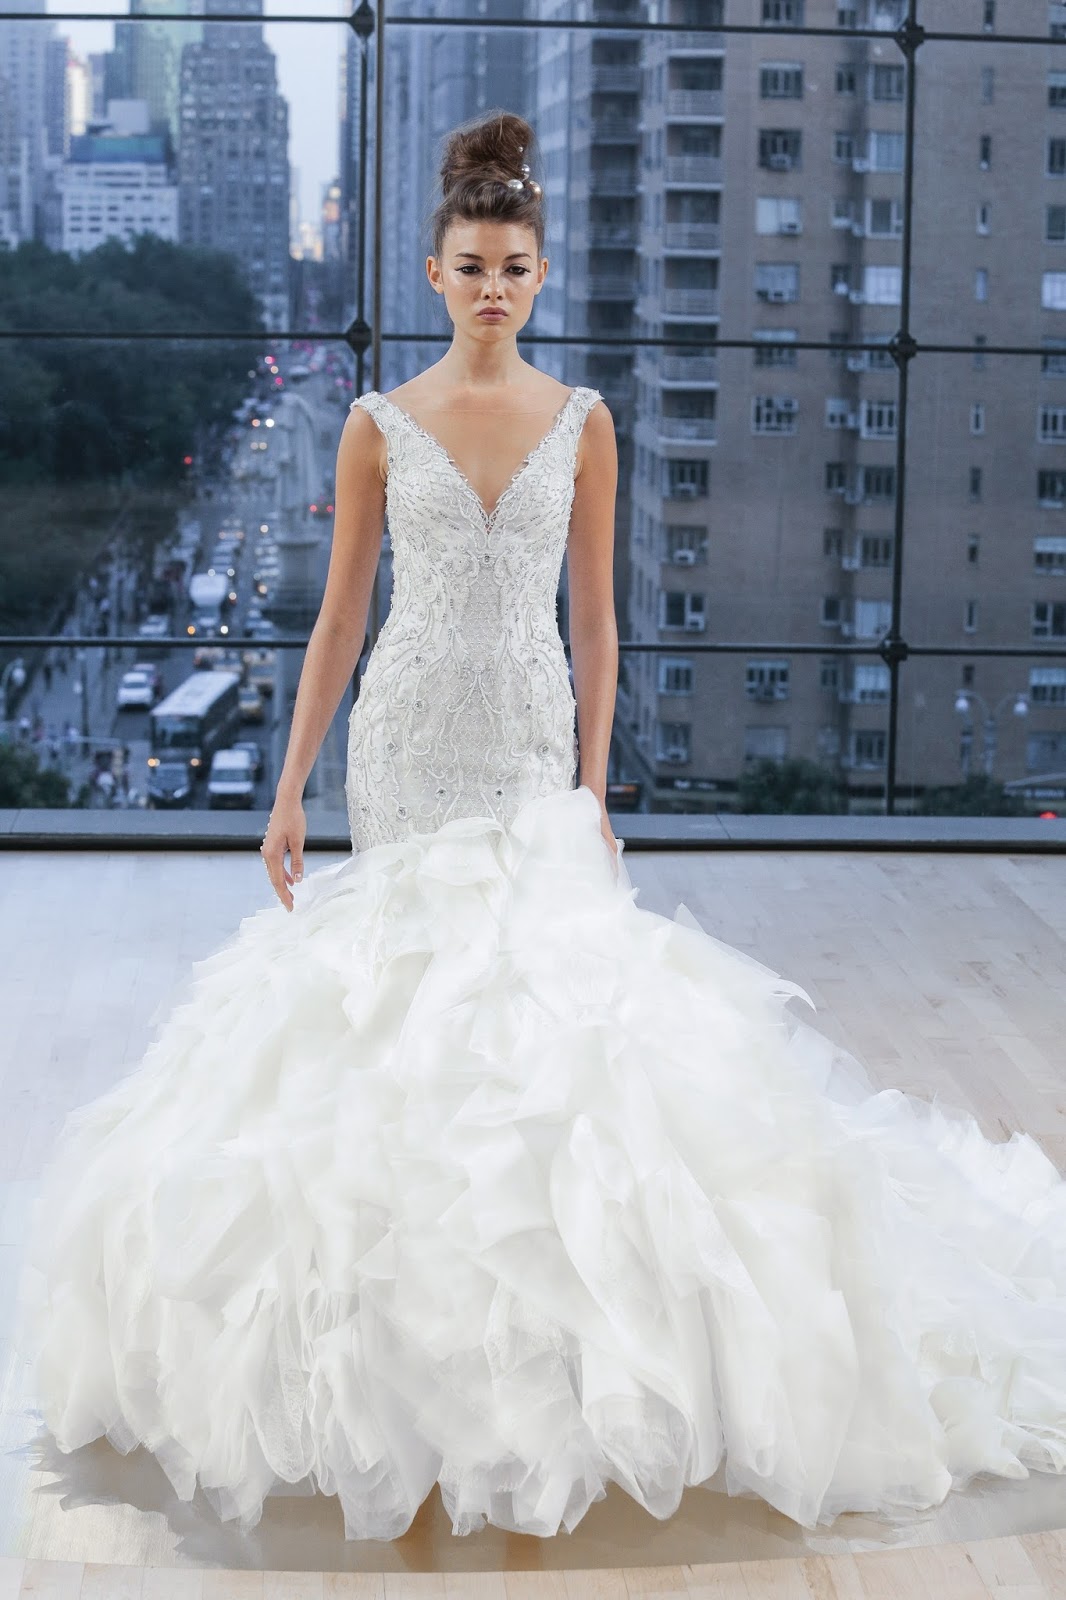 Wedding Gown Glamour: INES DI SANTO